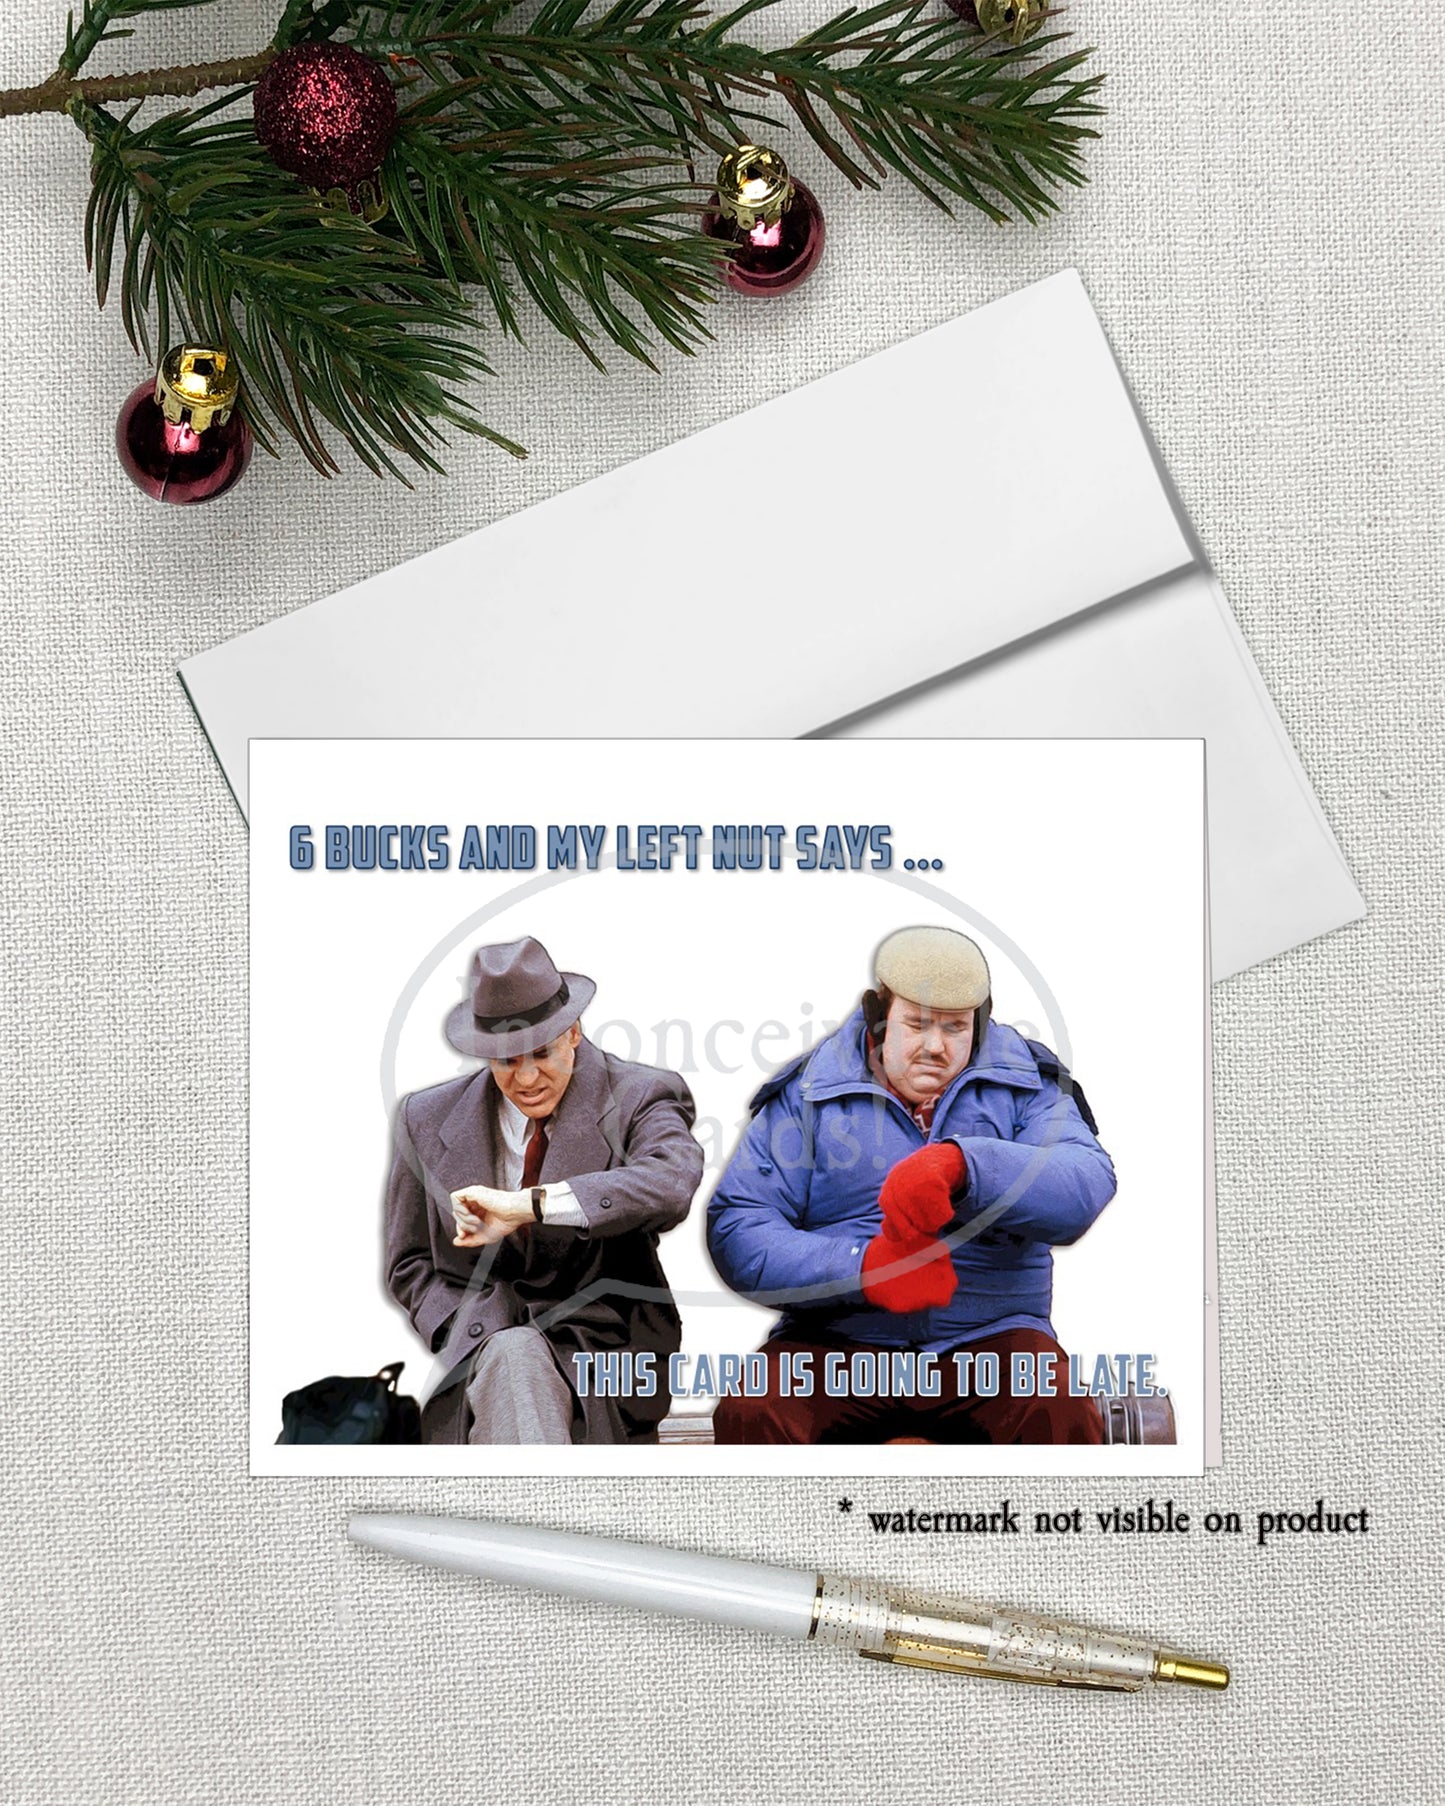 Planes and Trains Funny Belated Holiday Card - "Six Bucks and My Left Nut"